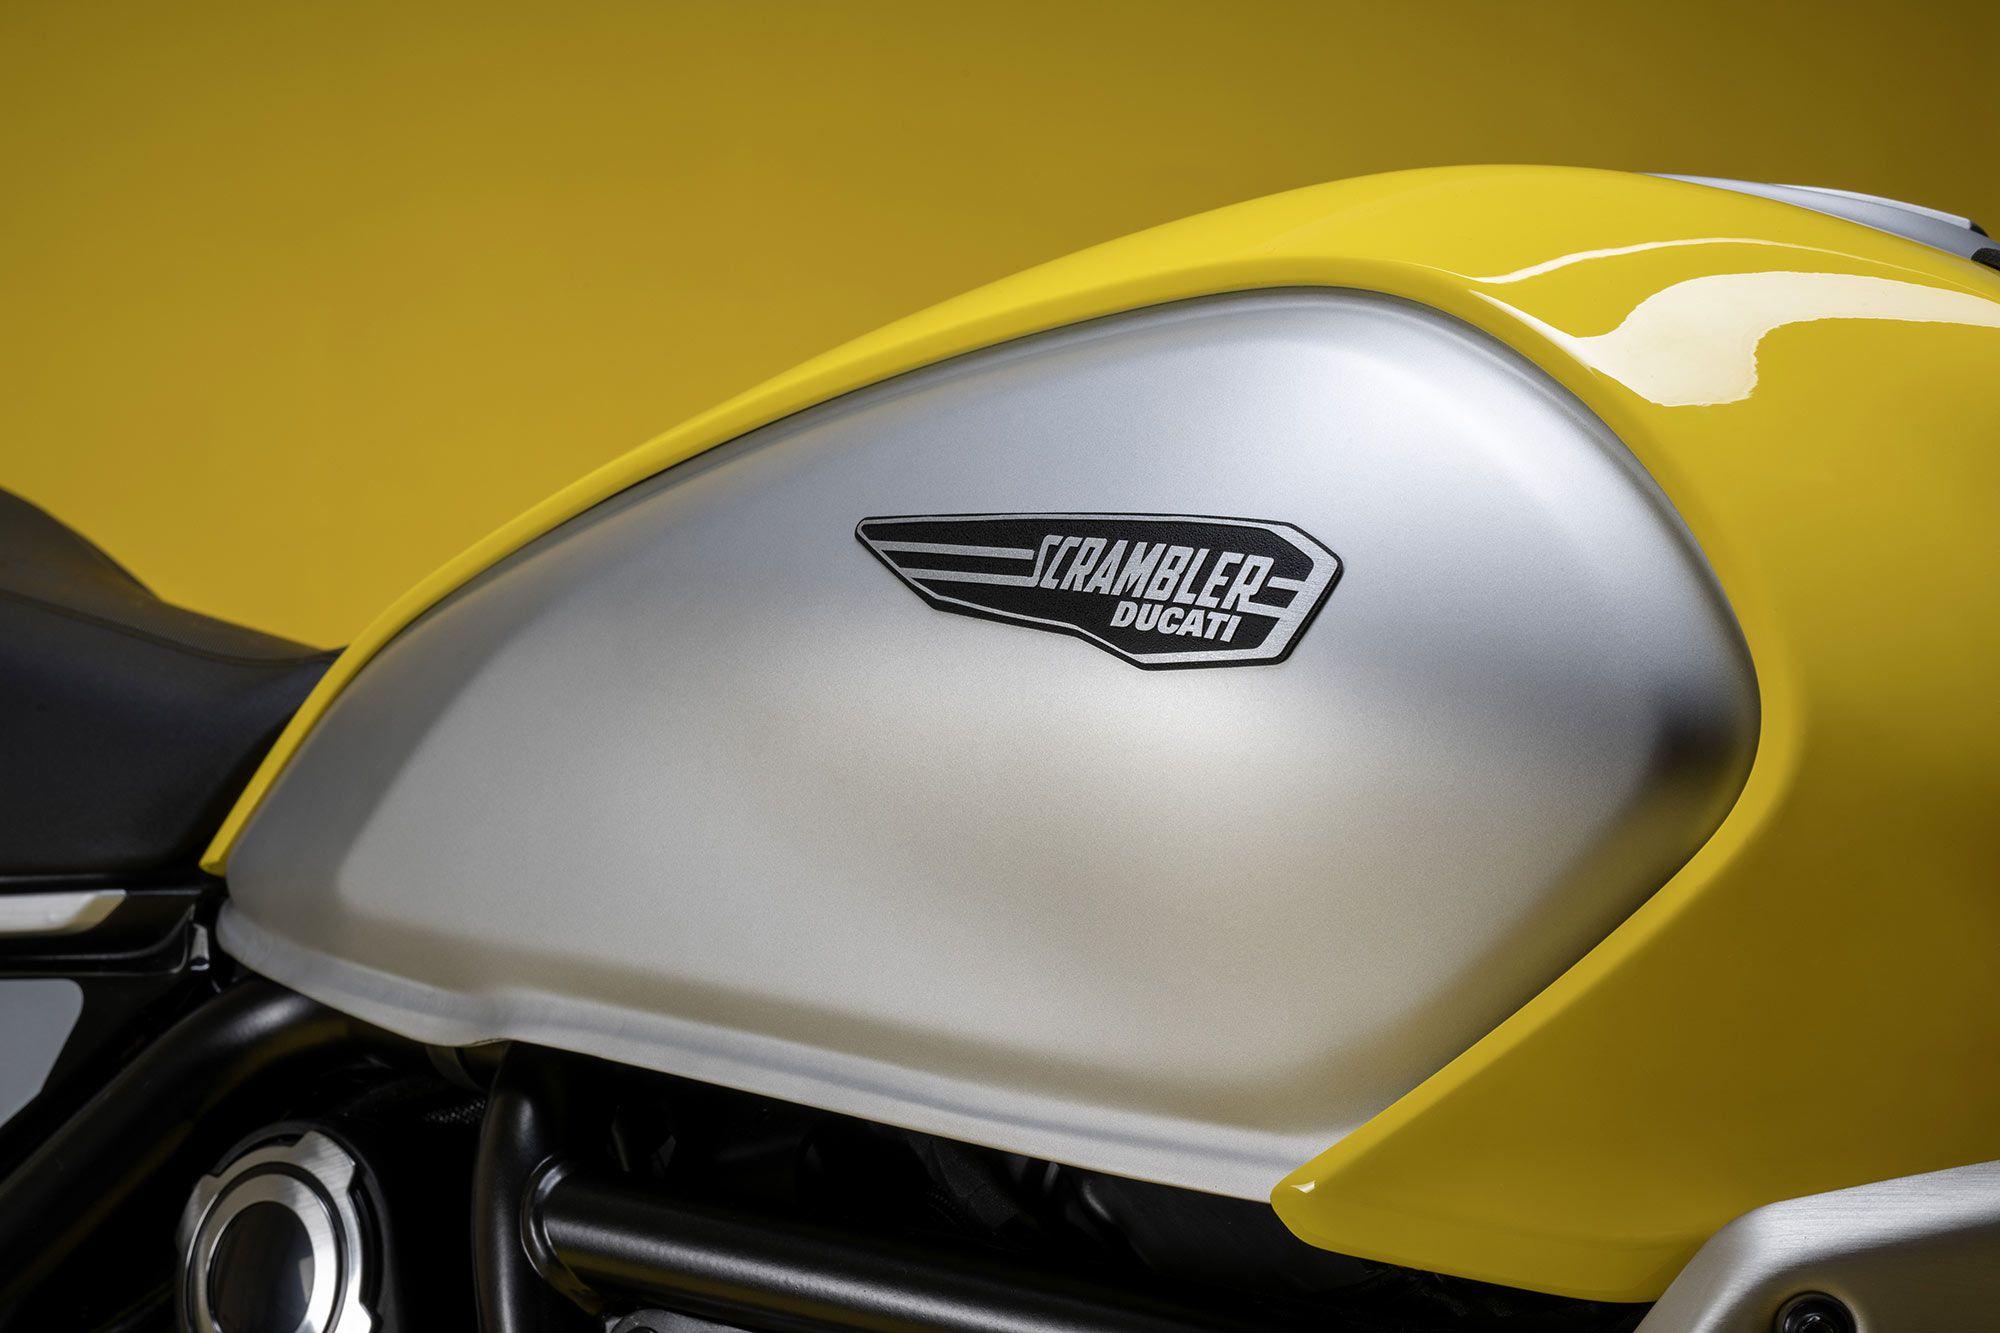 Interchangeable fuel covers will give Icon riders plenty of customization options.